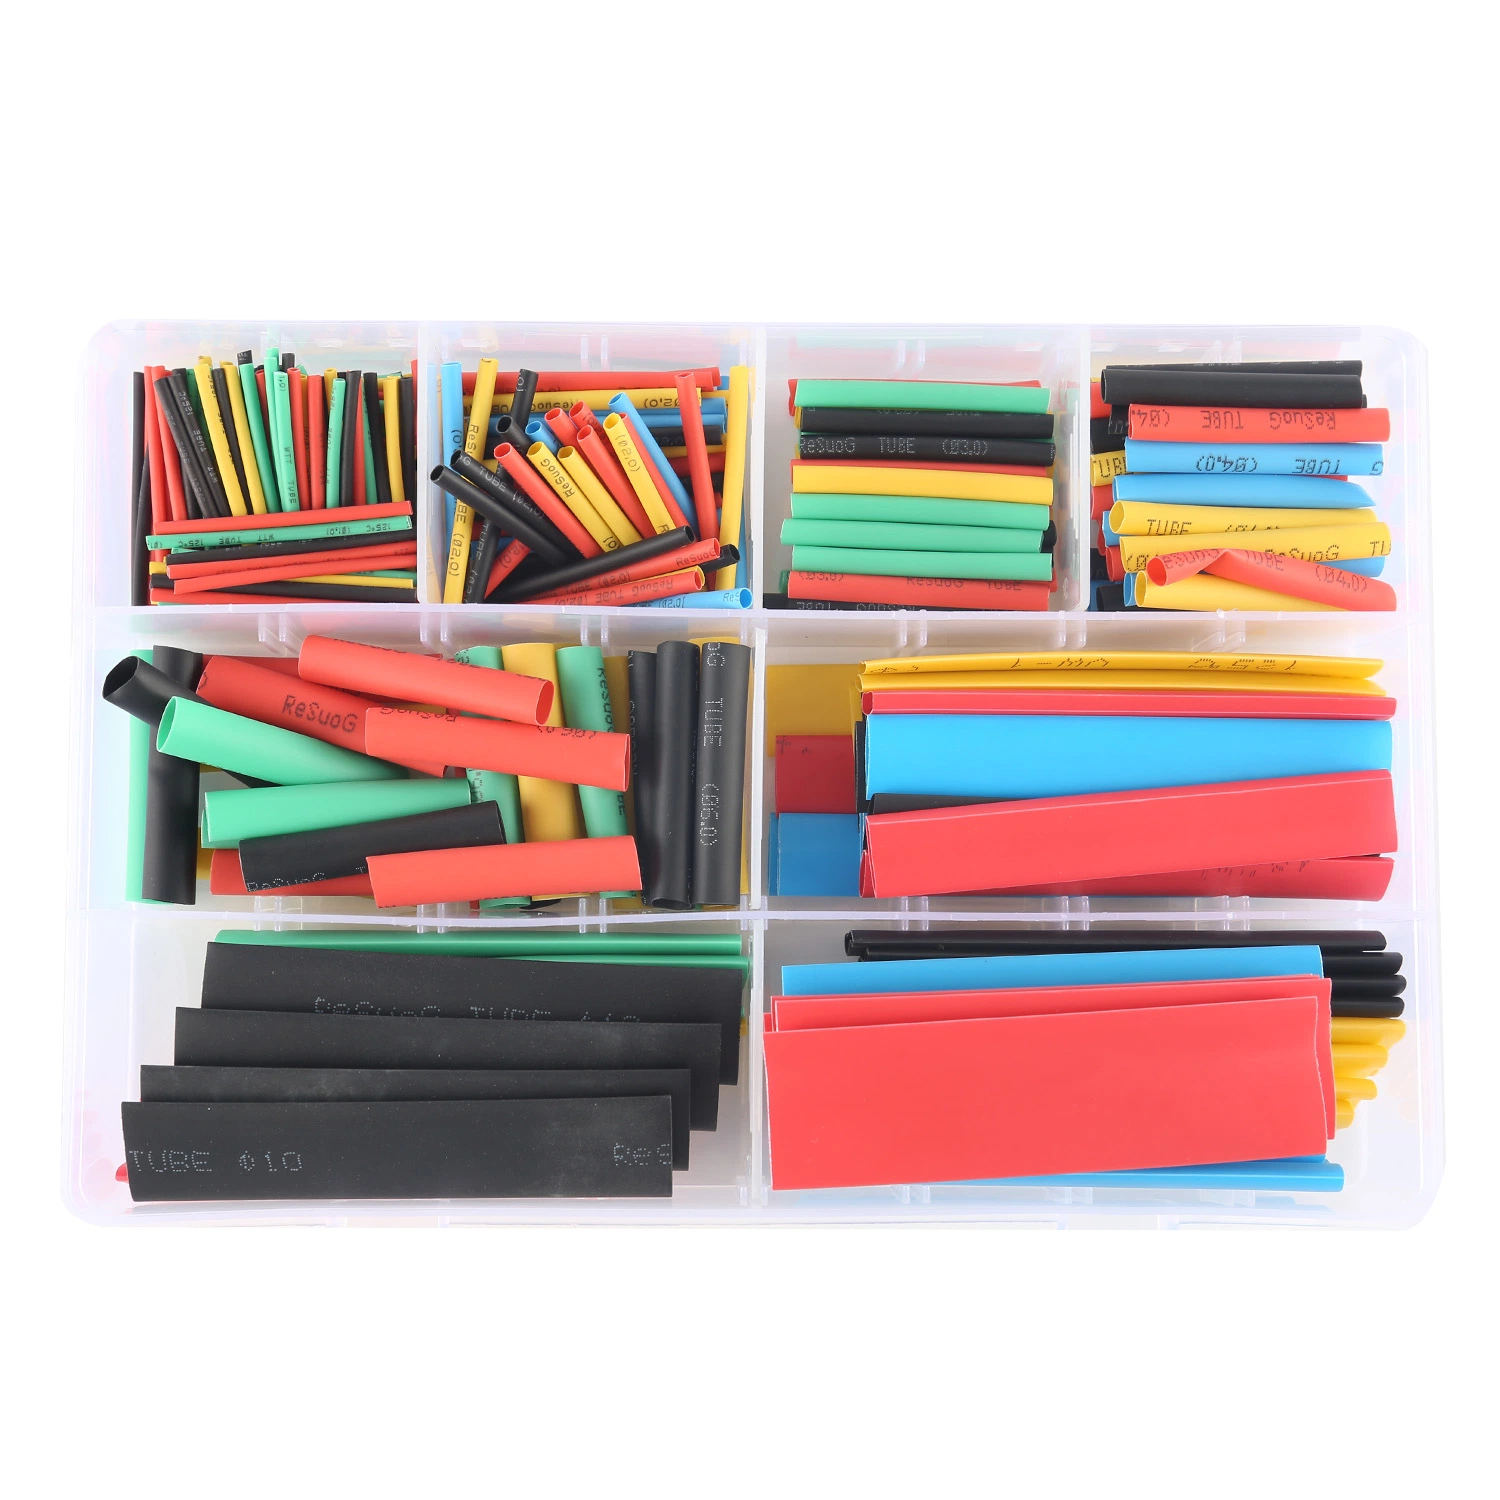 Hot Sale Heat Shrink Tubing 328PCS Cable Sleeves Combined Electrical Rubber Insulation Shrinkage Assorted Polyolefin Wrap Wire